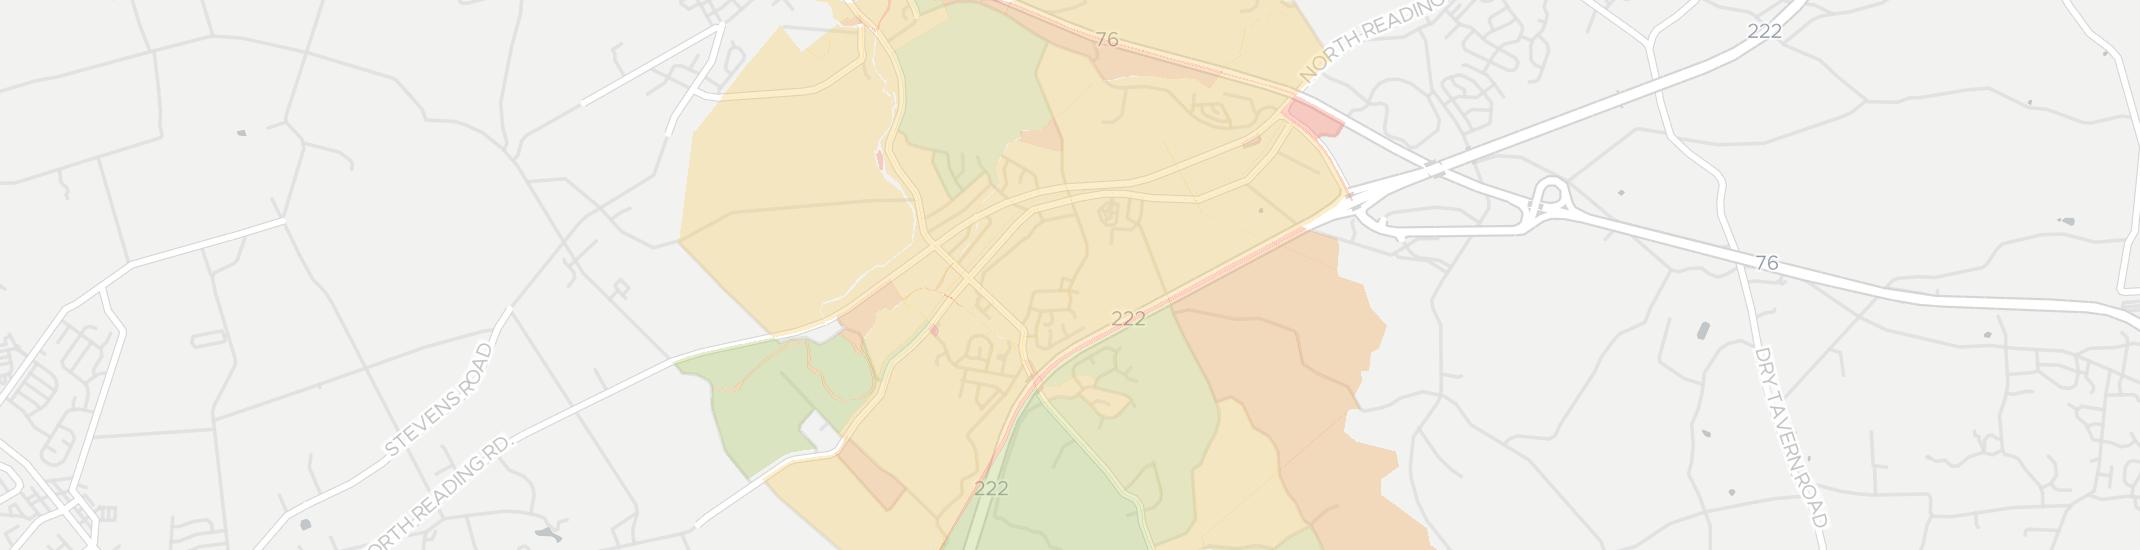 Reamstown Internet Competition Map. Click for interactive map.